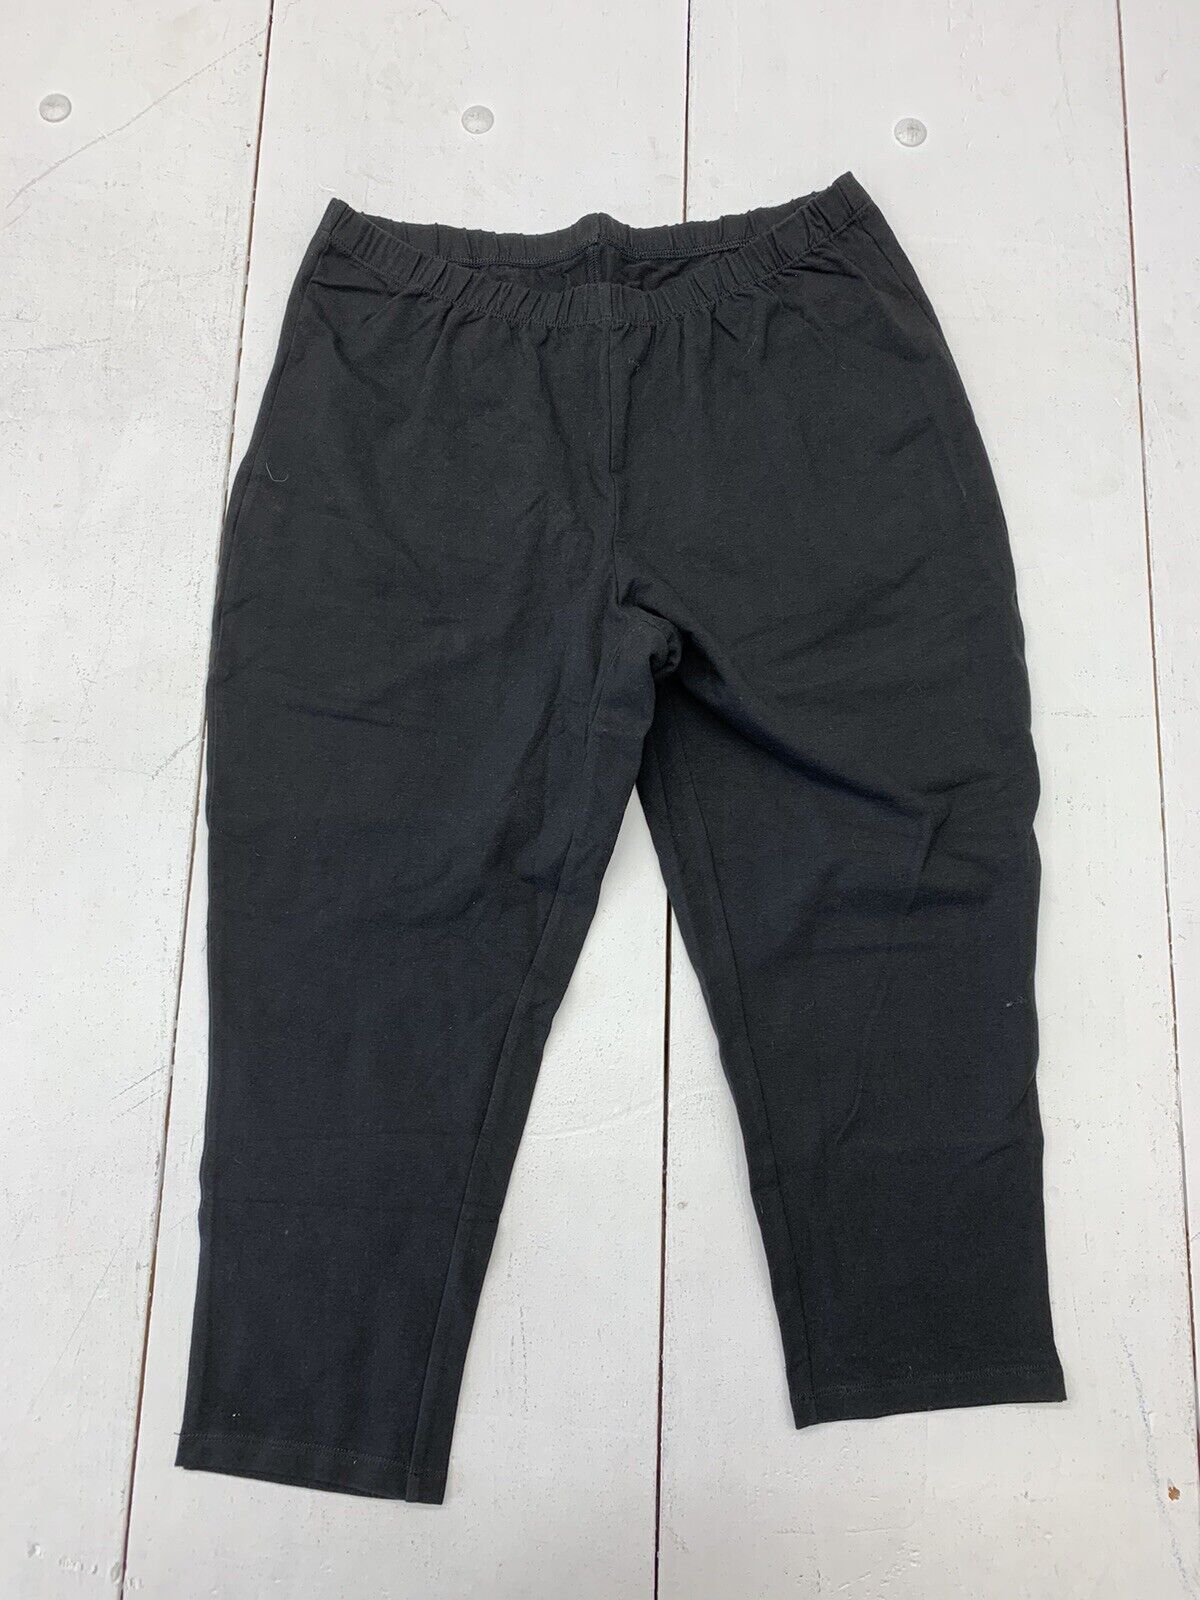 Just My Size Womens black leggings size 1X